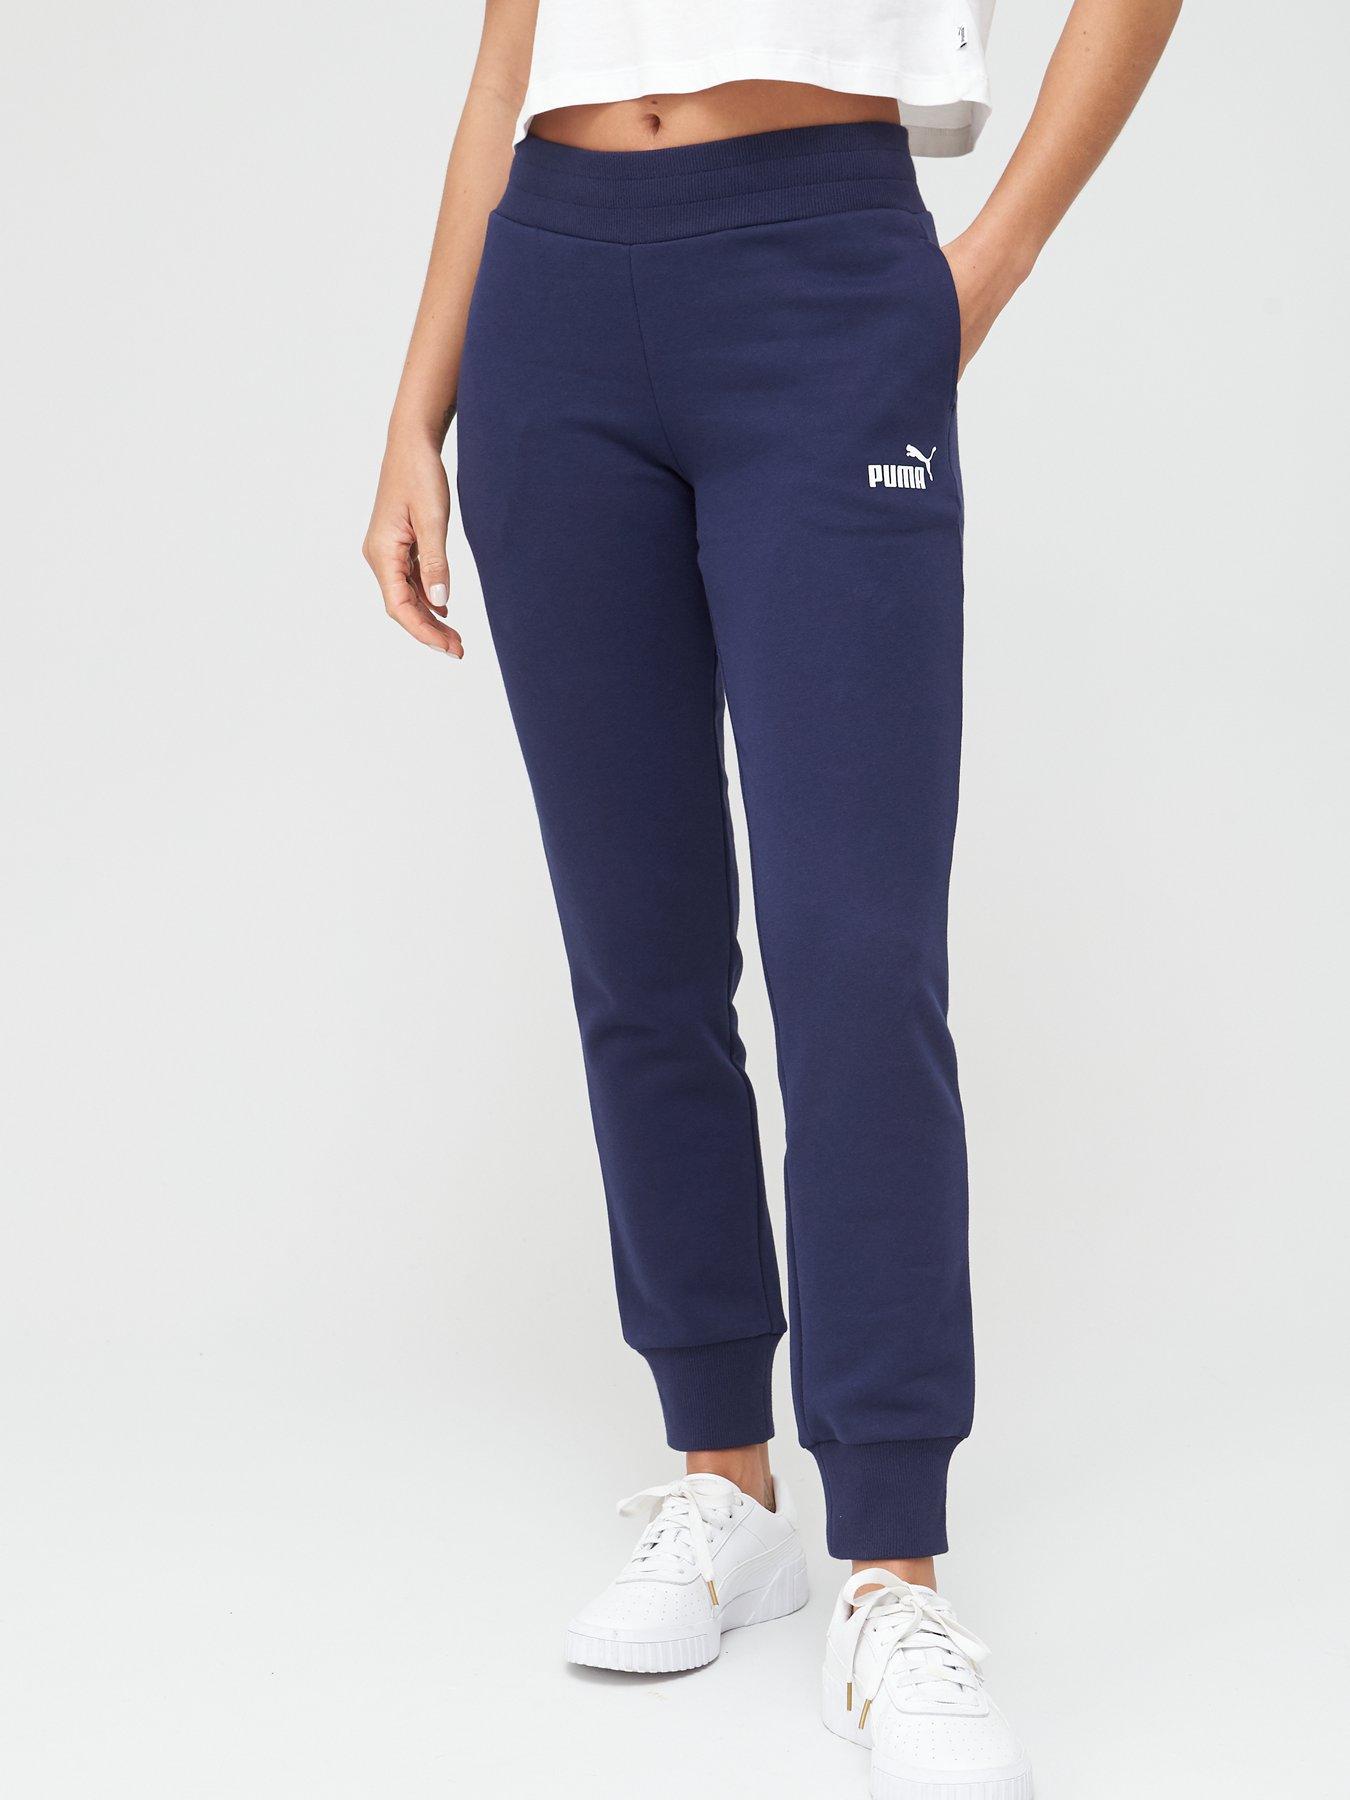 Puma HER Women's High-Waisted Pants - Free Shipping | DSW